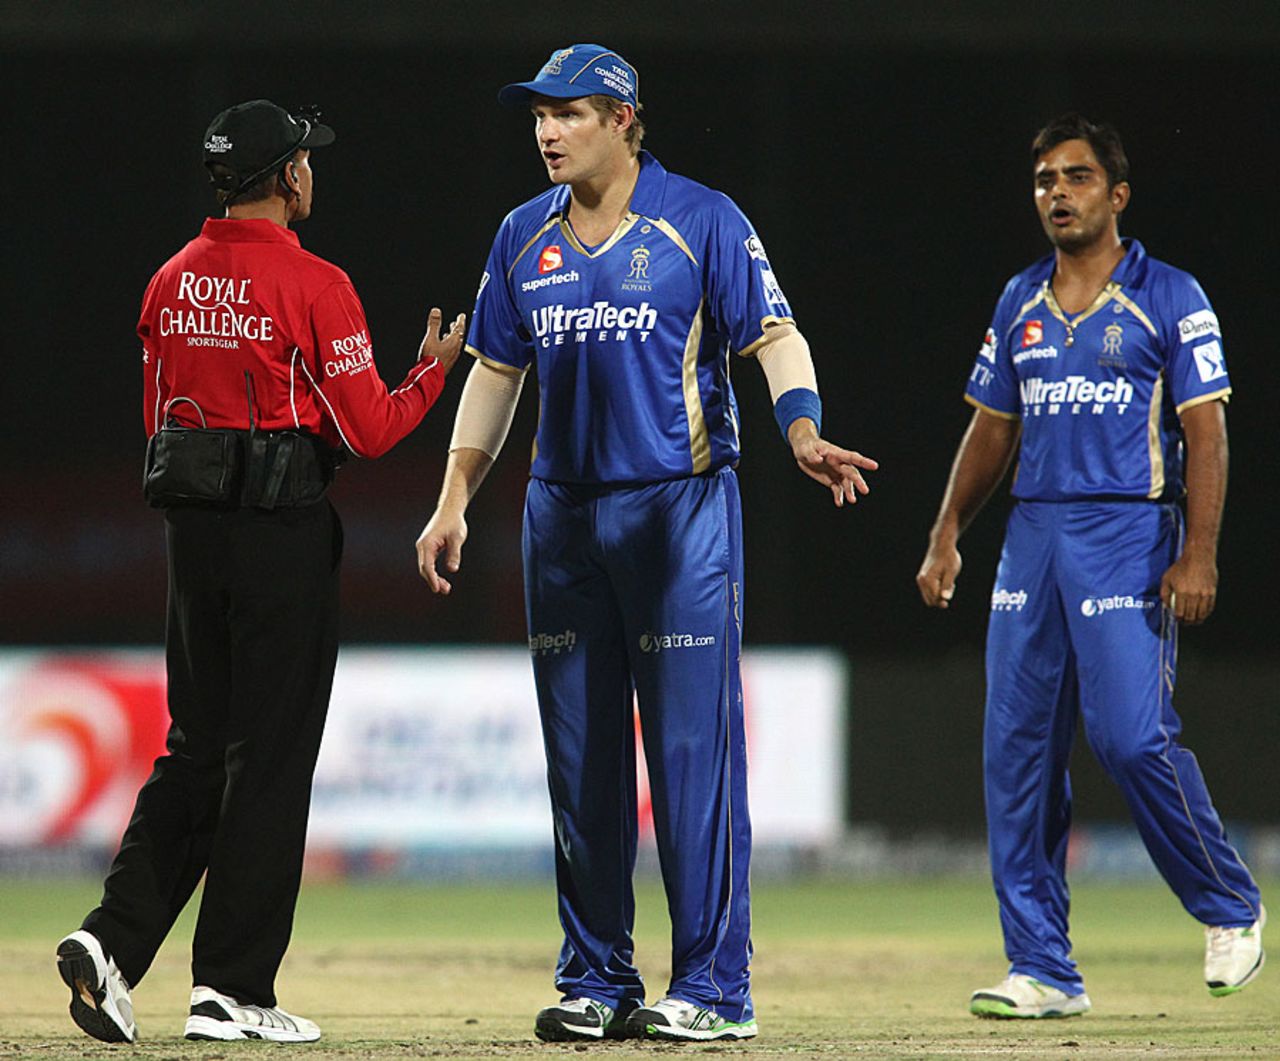 Shane Watson has a chat with umpire Sanjay Hazare over a run-out appeal that wasn't referred, Delhi Daredevils v Rajasthan Royals, IPL, Delhi, May 3, 2014